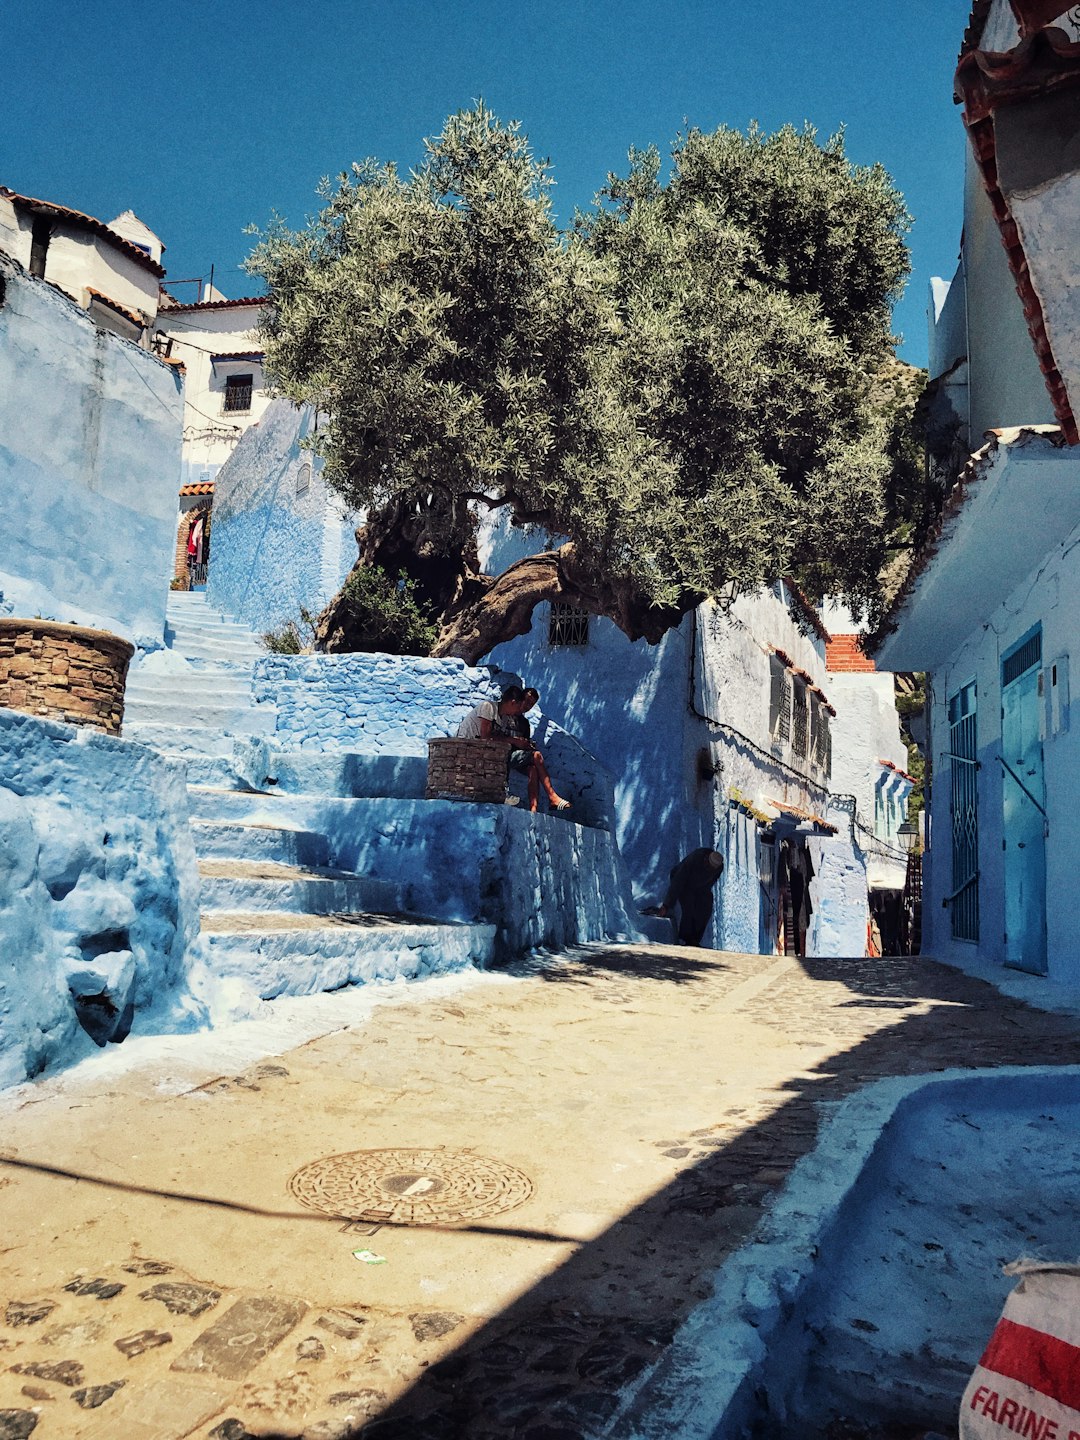 travelers stories about Town in Chefchaouen, Morocco